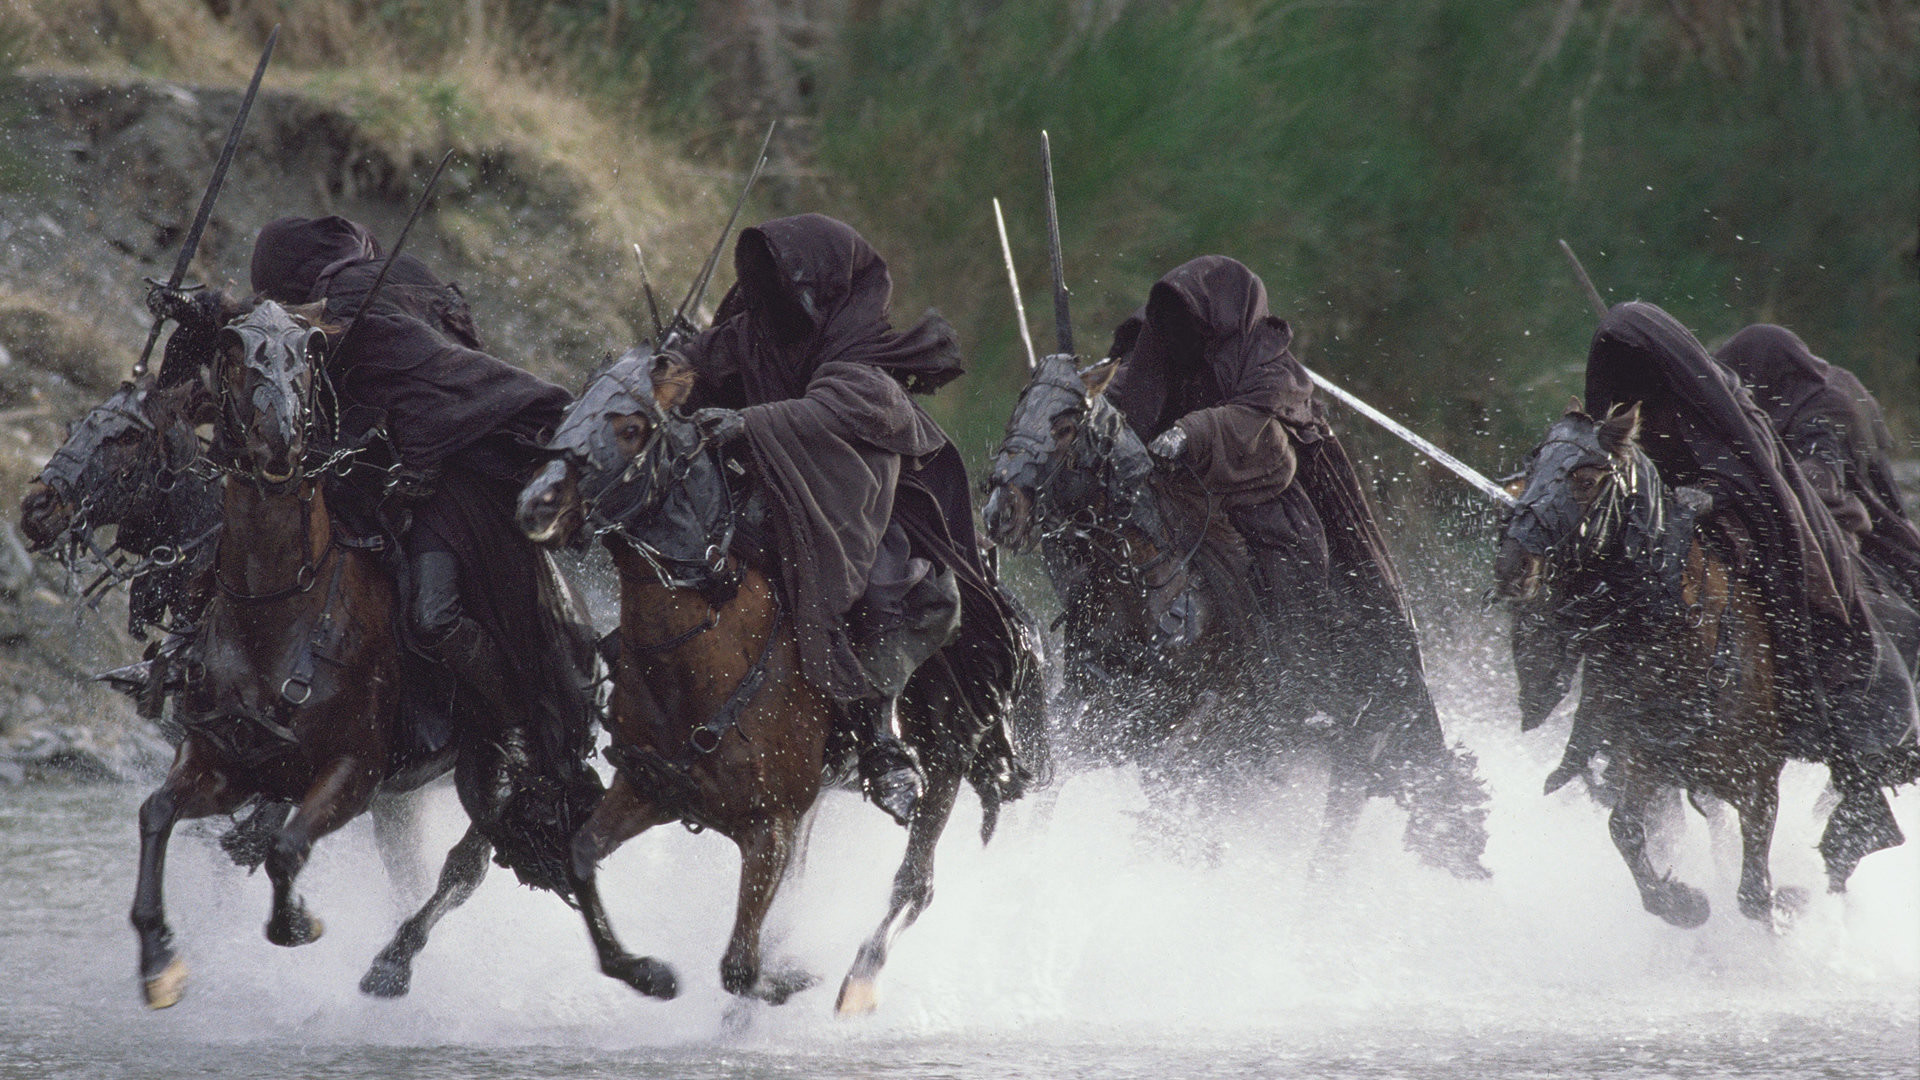 1920x1080 Horses Movies Nazgul Ringwraith The Fellowship Of Ring Lord Rings Weapons